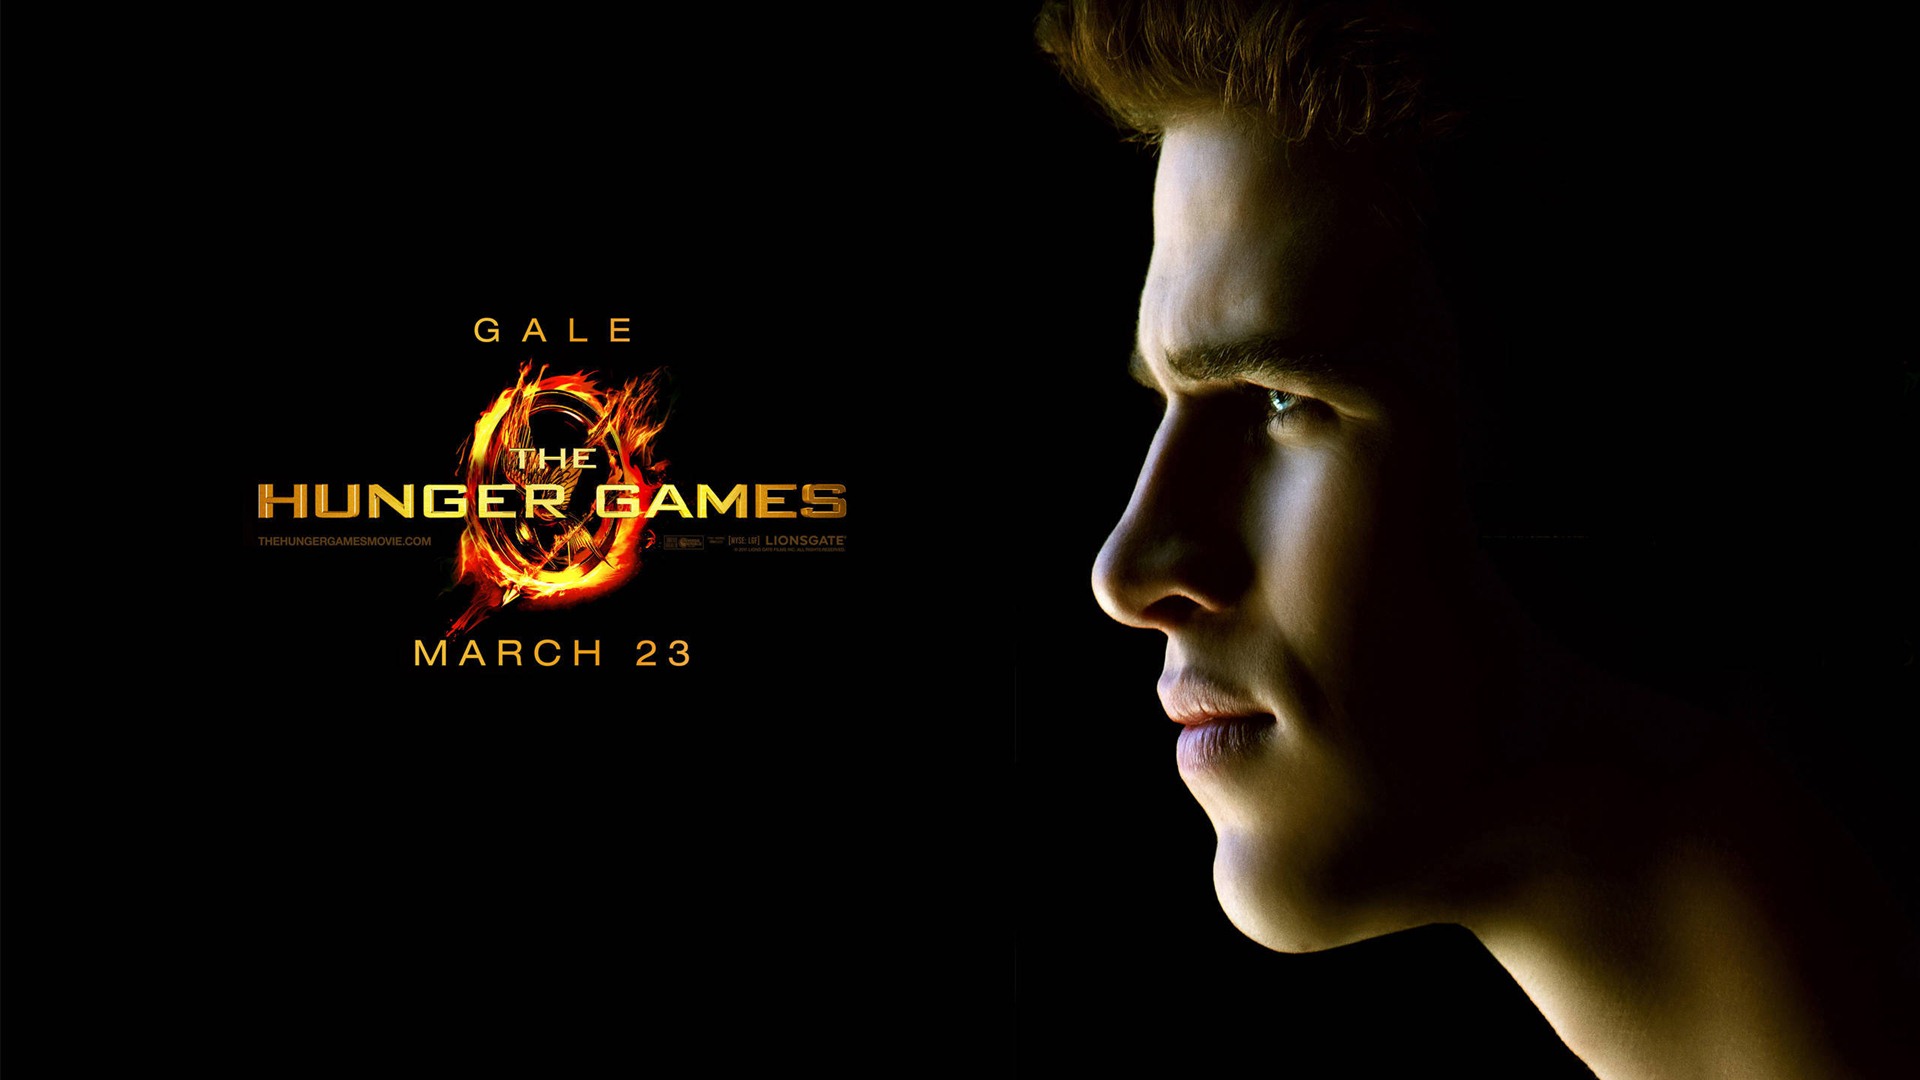 The Hunger Games HD wallpapers #4 - 1920x1080